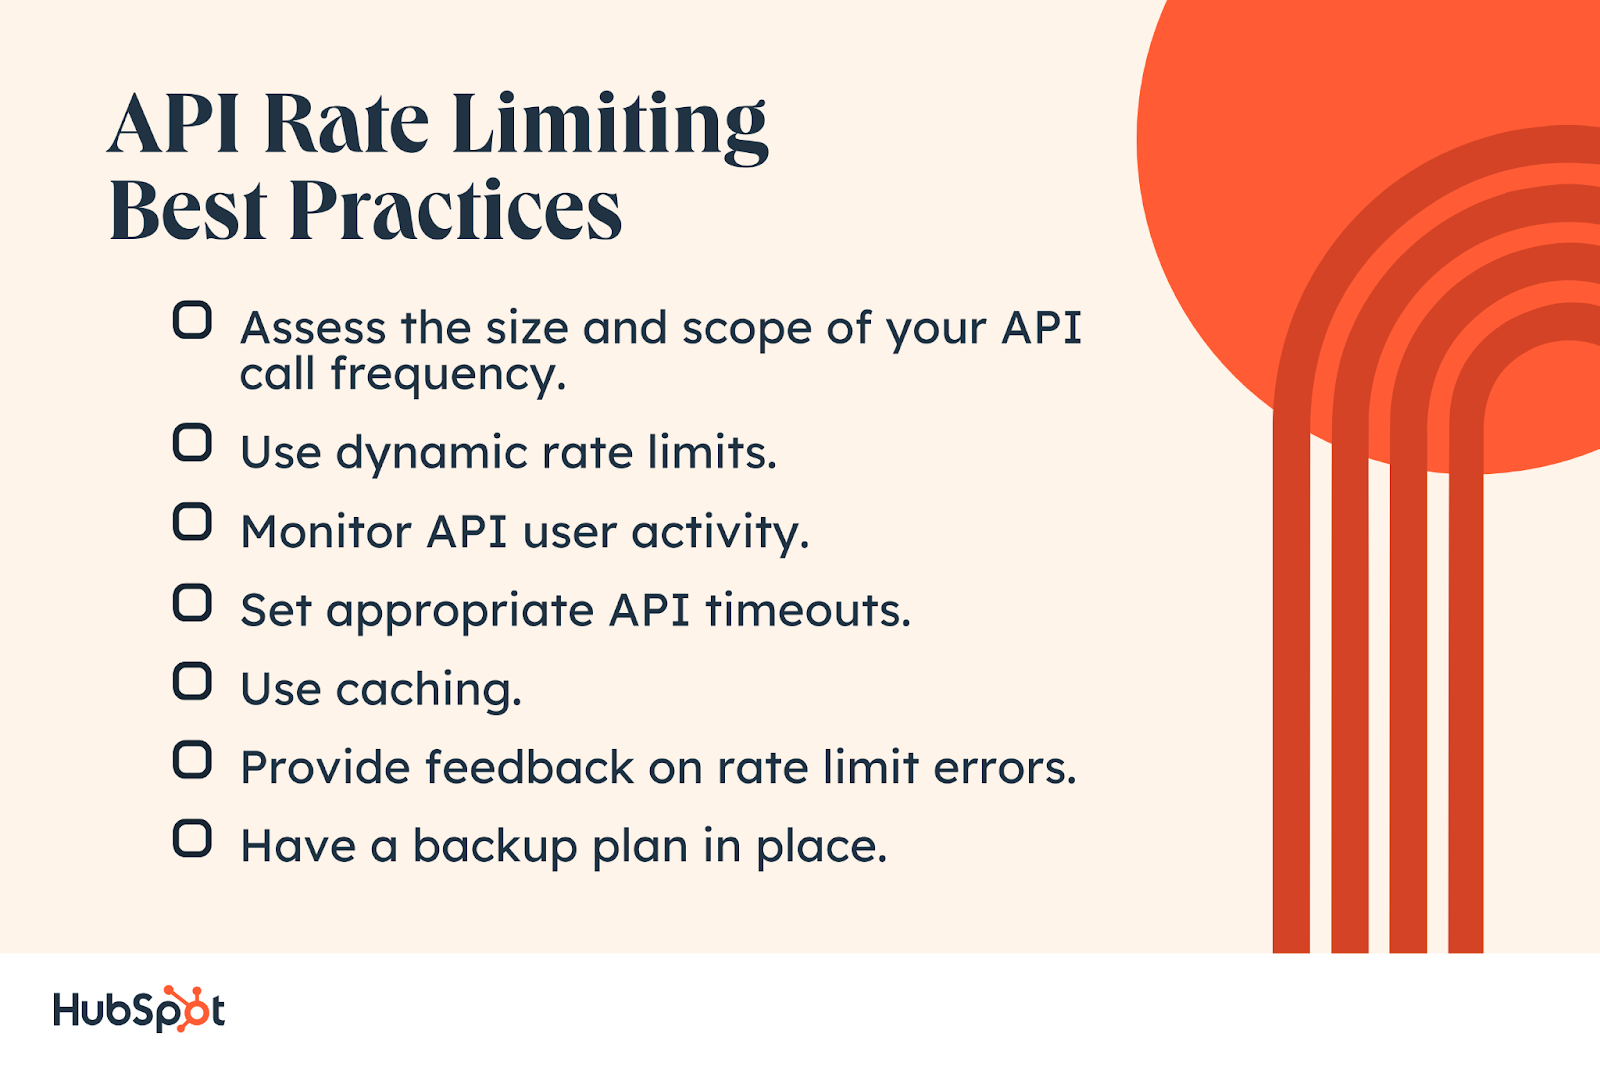 API Rate Limiting Best Practices. Monitor API user activity. Assess the size and scope of your API call frequency. Set appropriate API timeouts. Use dynamic rate limits. Use caching. Provide feedback on rate limit errors. Have a backup plan in place.